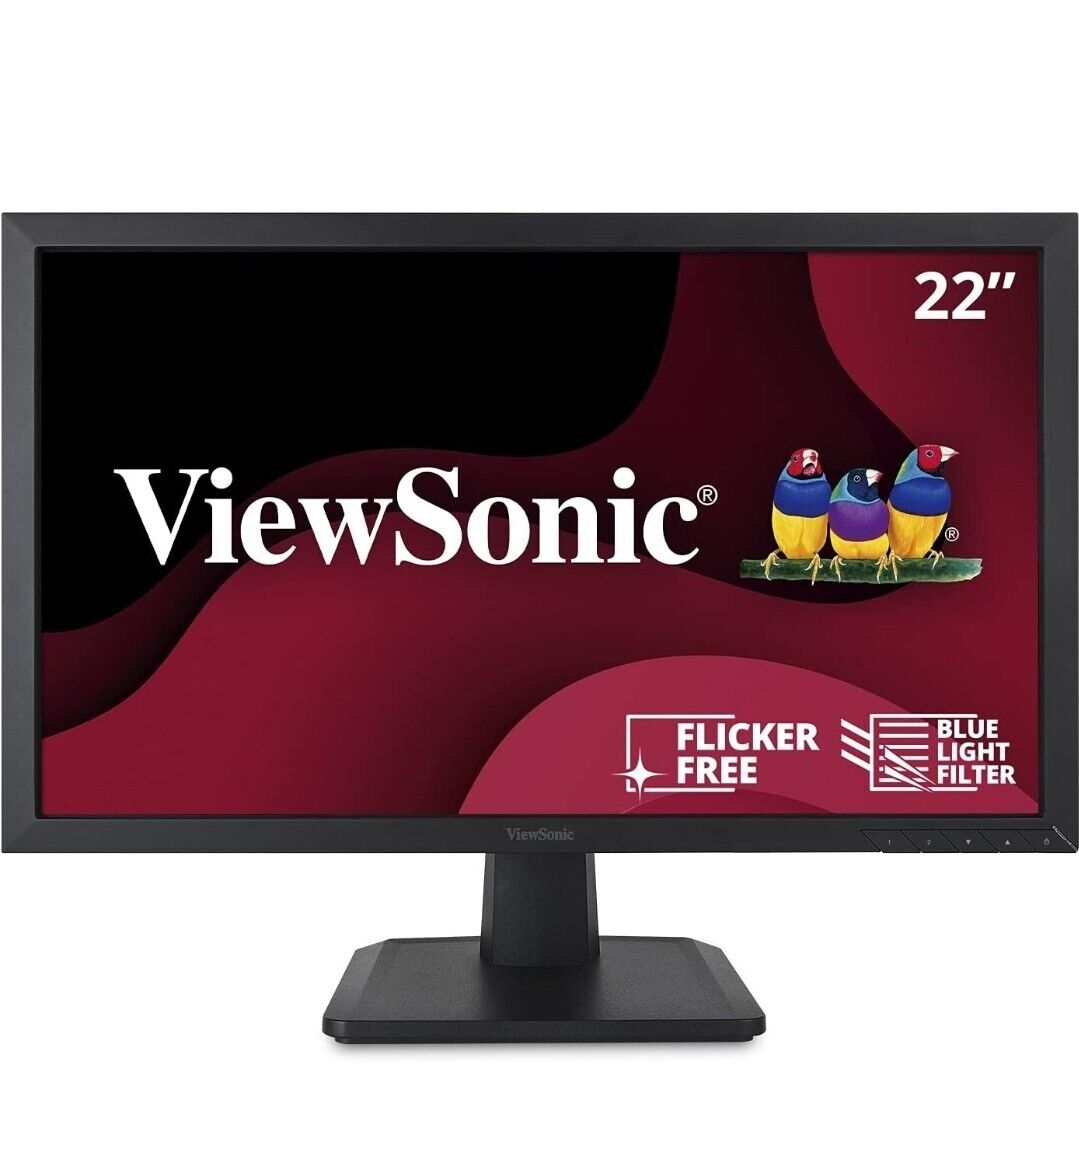 ViewSonic VA2251M-LED VS14589 22 inch 1920 x 1080 with Power Cables Local Pickup